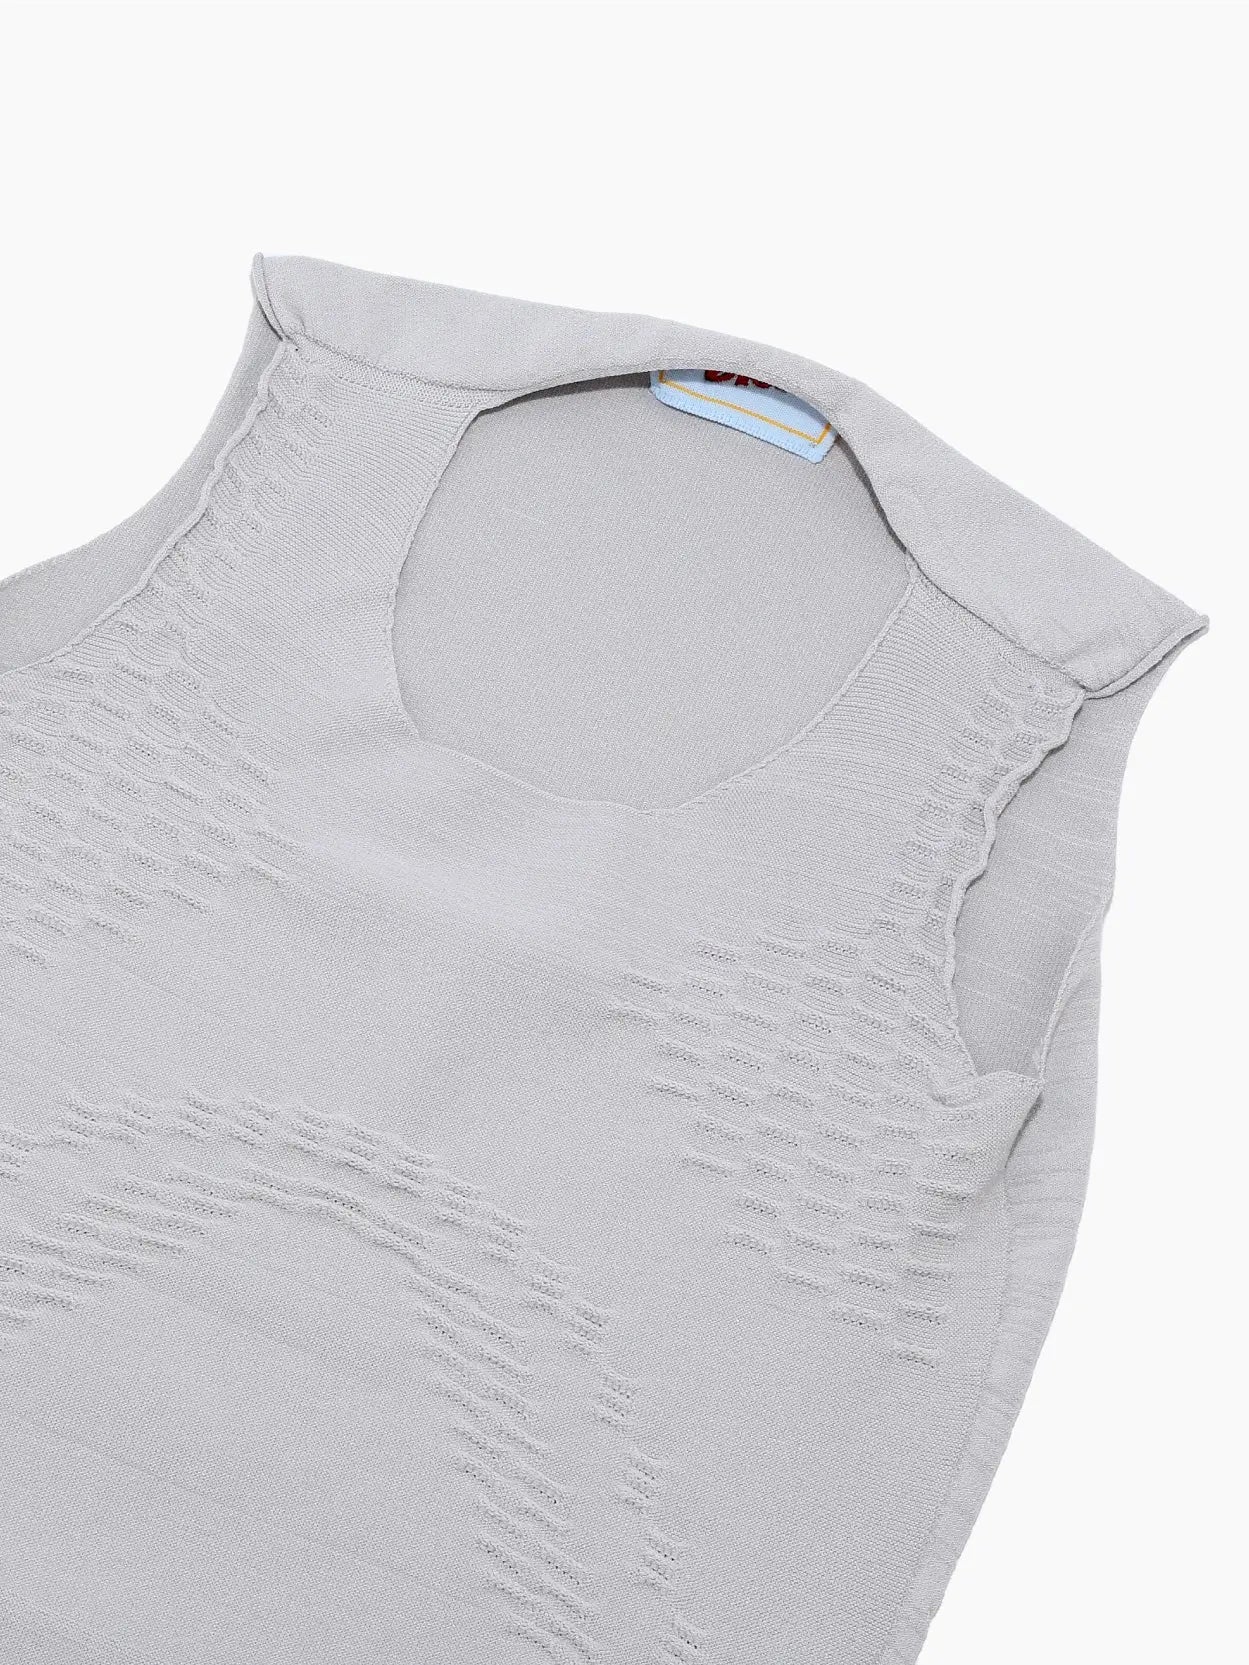 A sleeveless, light gray baby onesie called Alet Body Grey by Bielo with a round neckline and snap closures at the bottom, available exclusively at Bassalstore. The soft, slightly textured fabric ensures comfort. The onesie is laid flat on a white background.